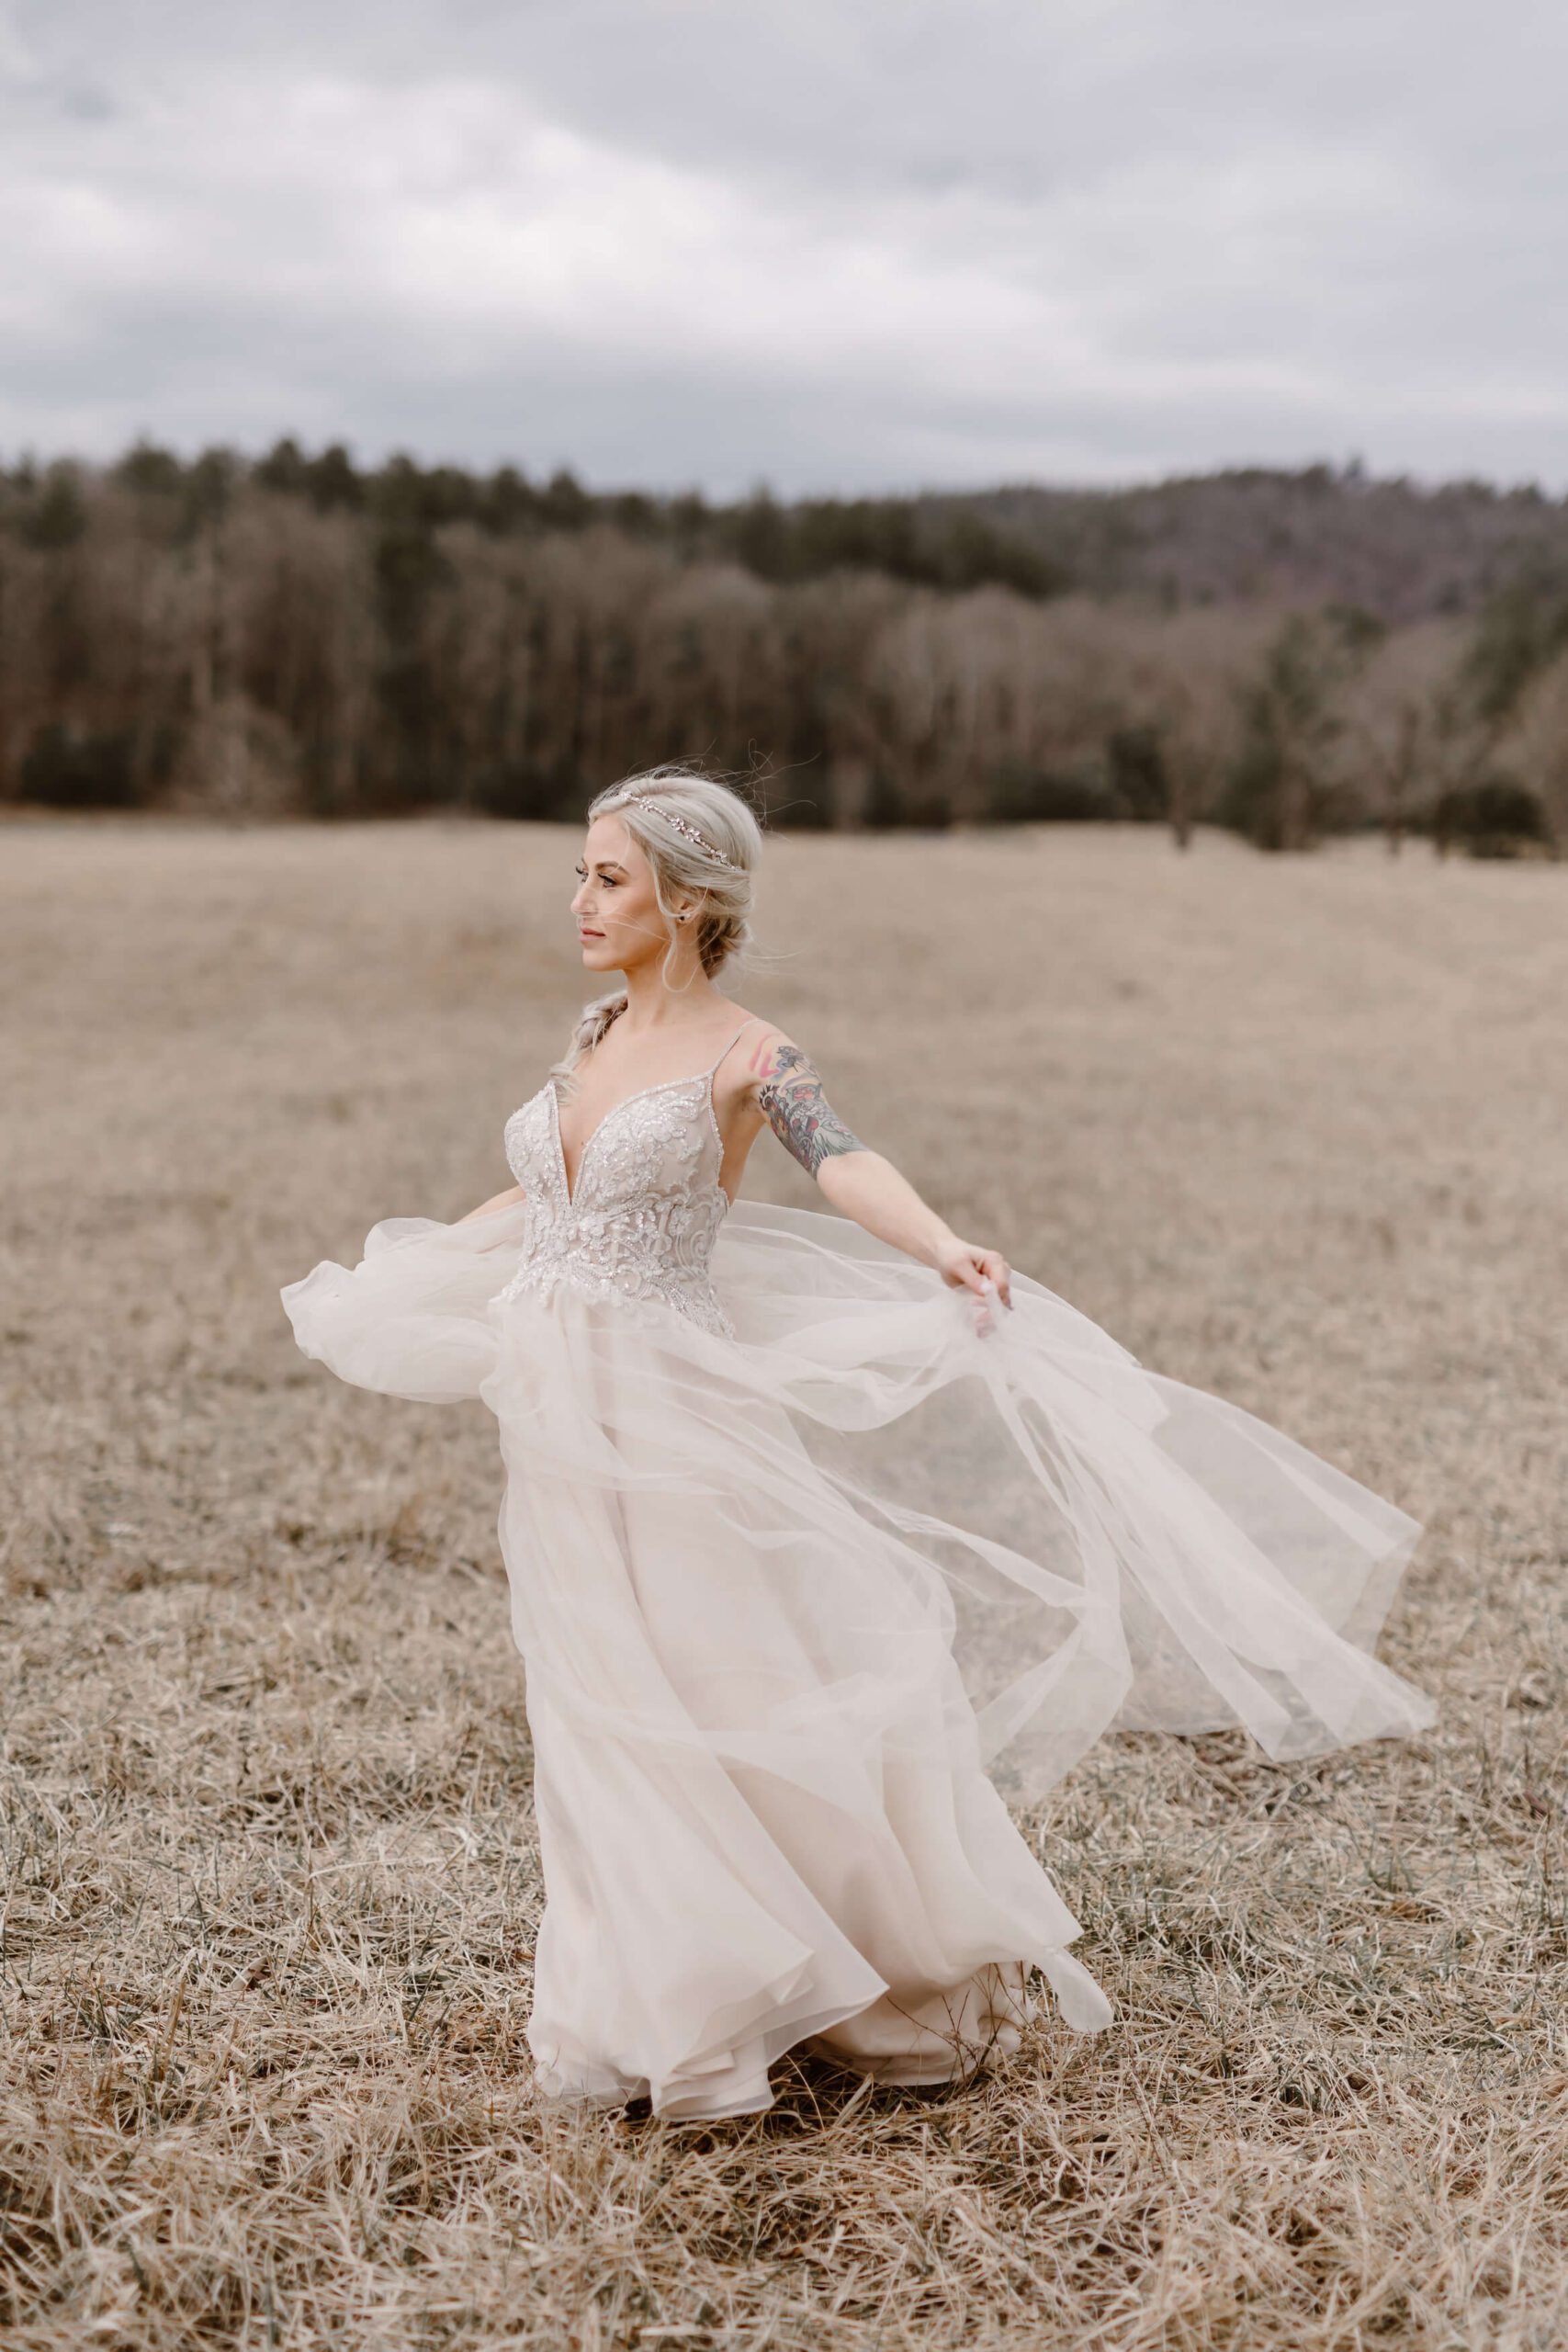 woman in flowing wedding dress walking through field in the Smoky Mountains photographed by Smoky Mountain Photographer Erin Morrison